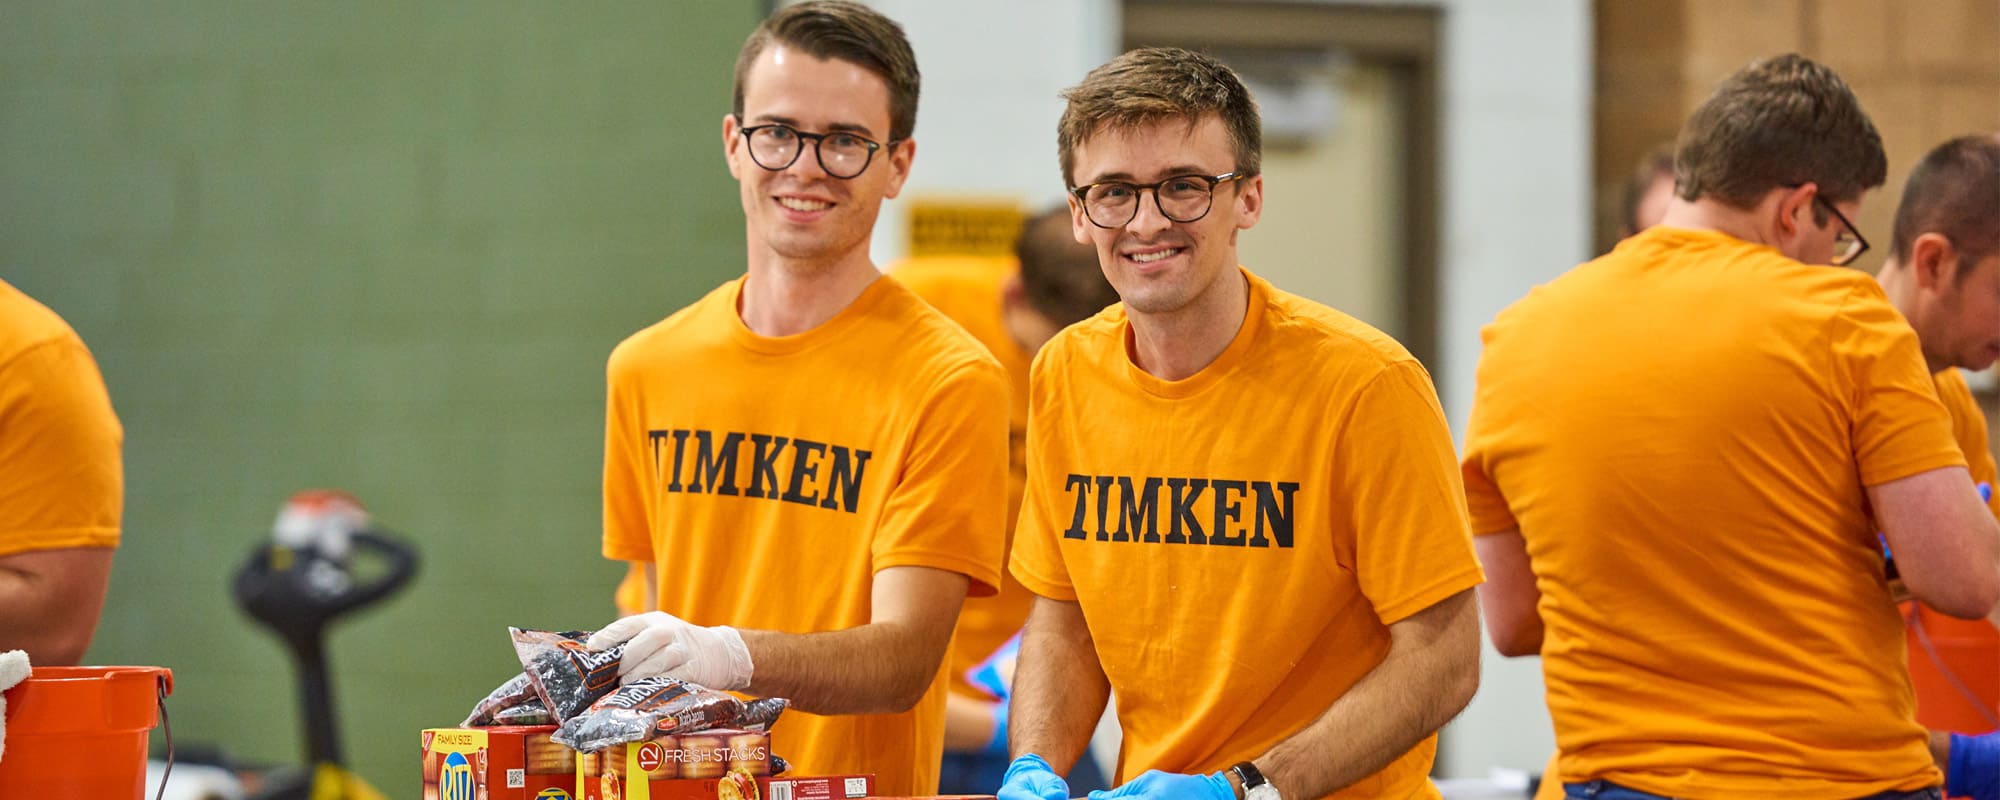 Corporate Social Responsibility: How Timken Moves Our World Forward, For Good